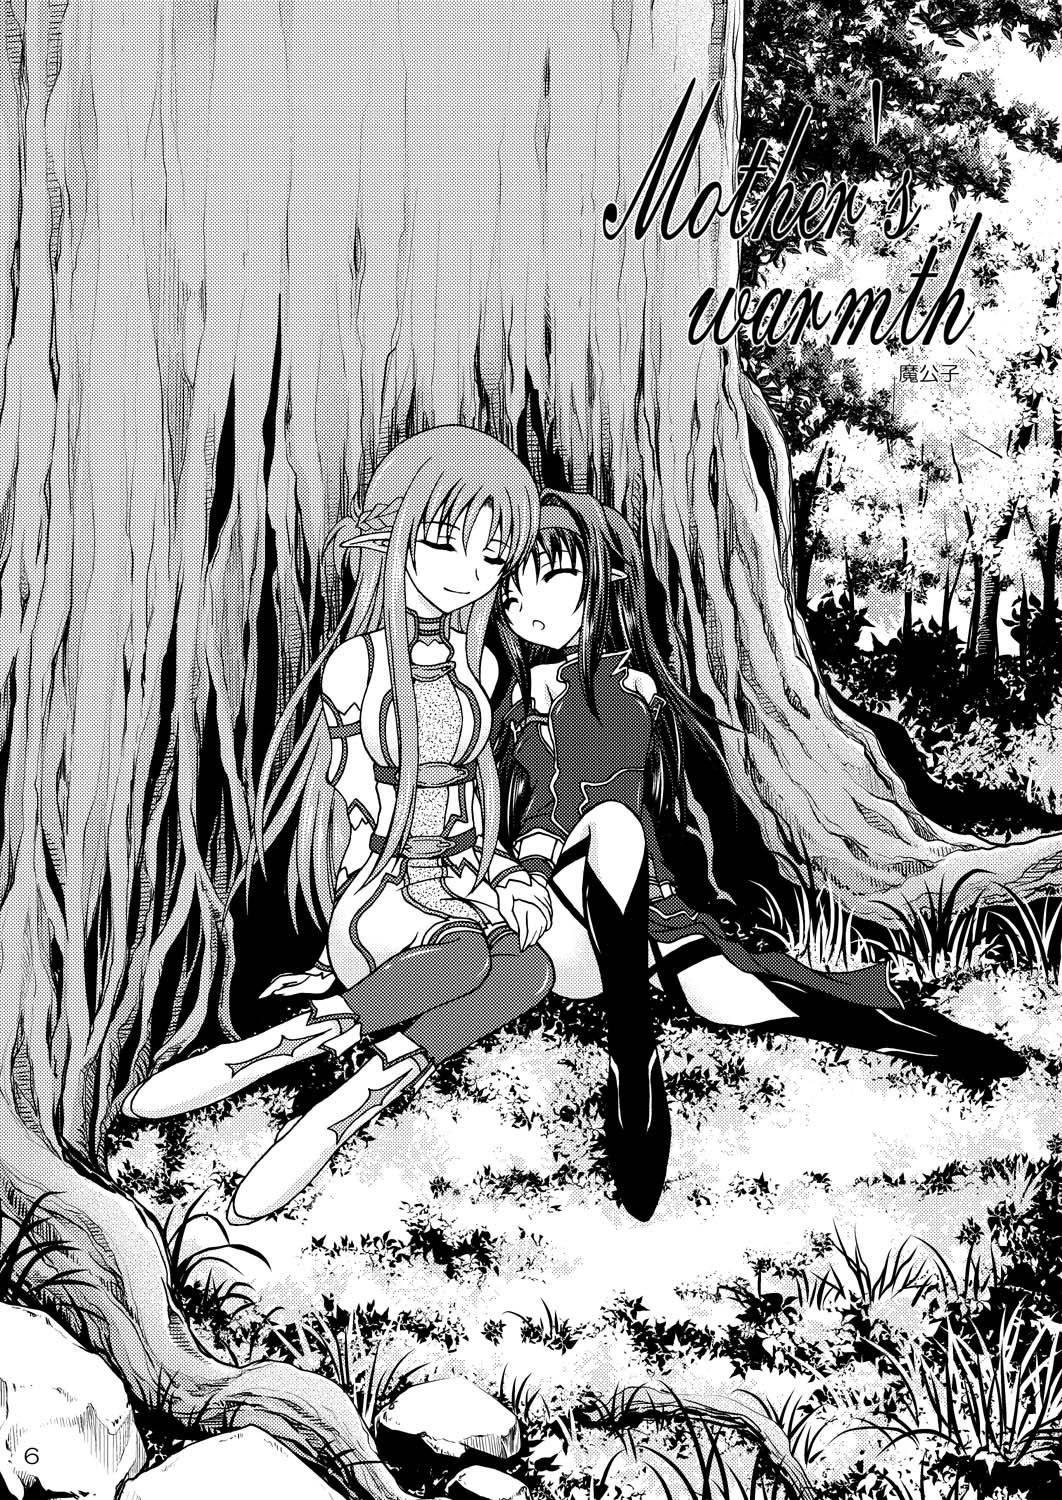 Rola Mother's warmth - Sword art online Threesome - Page 6